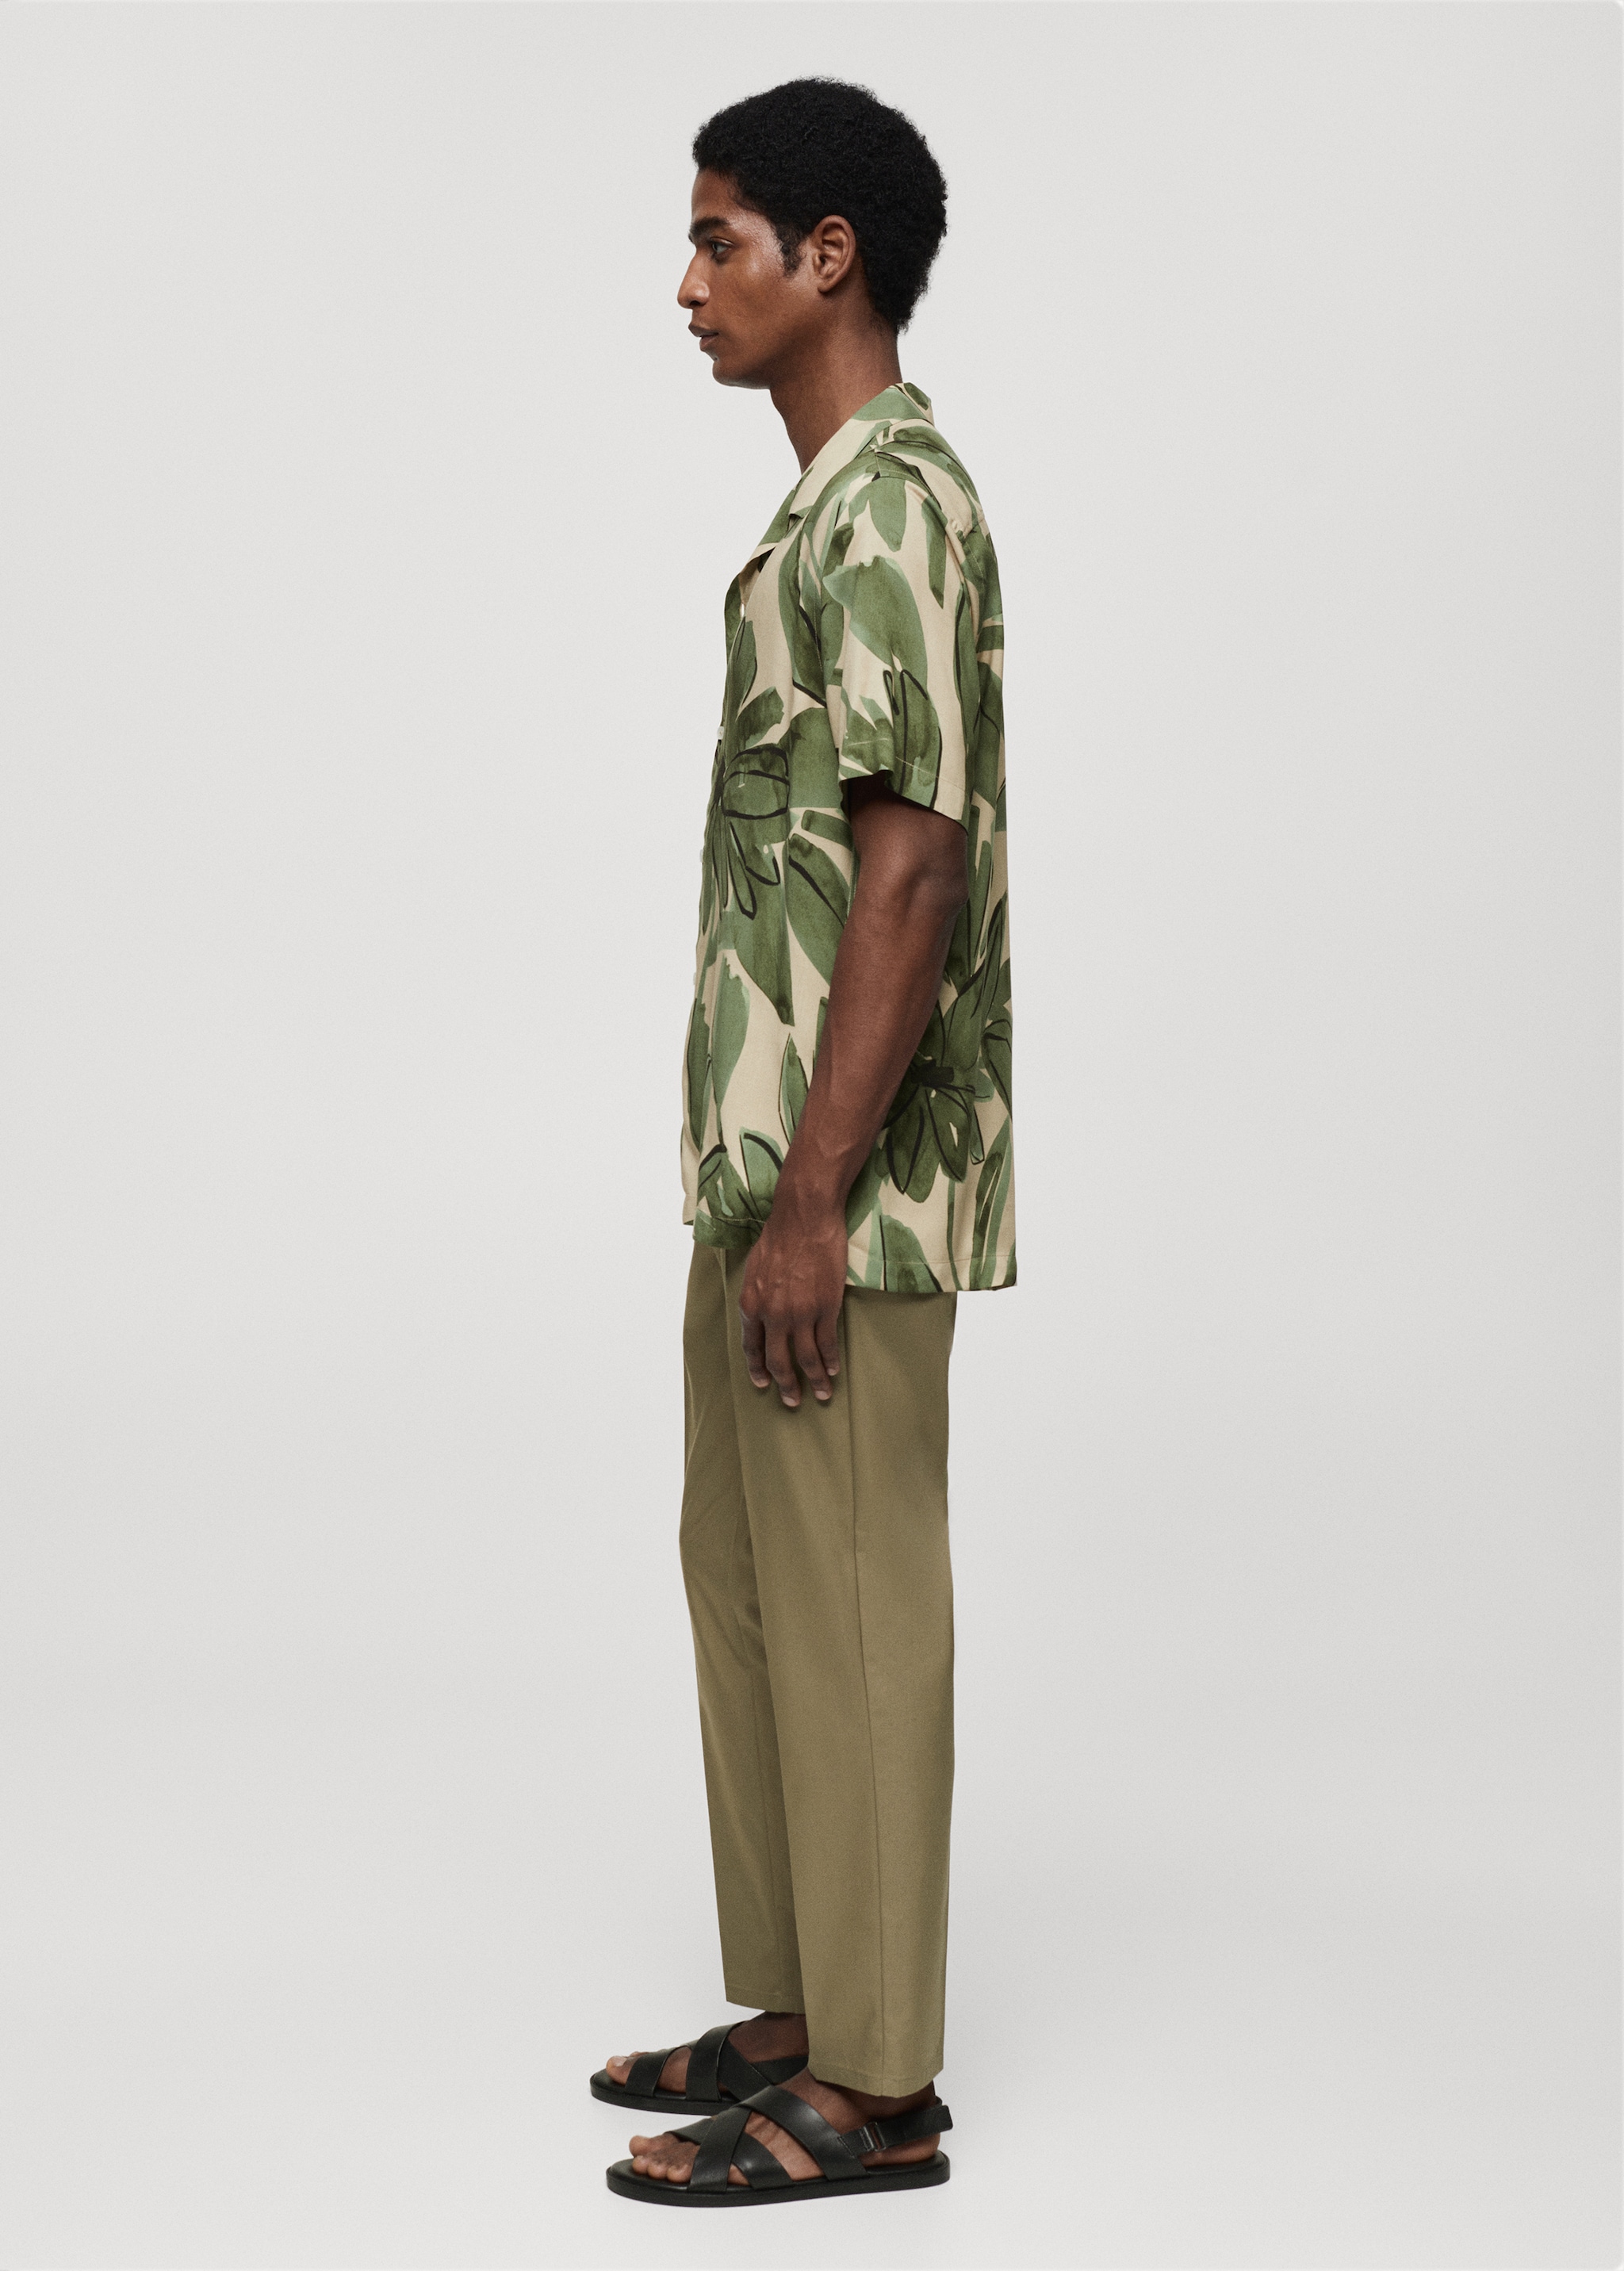 Flowing tropical-print shirt - Details of the article 2